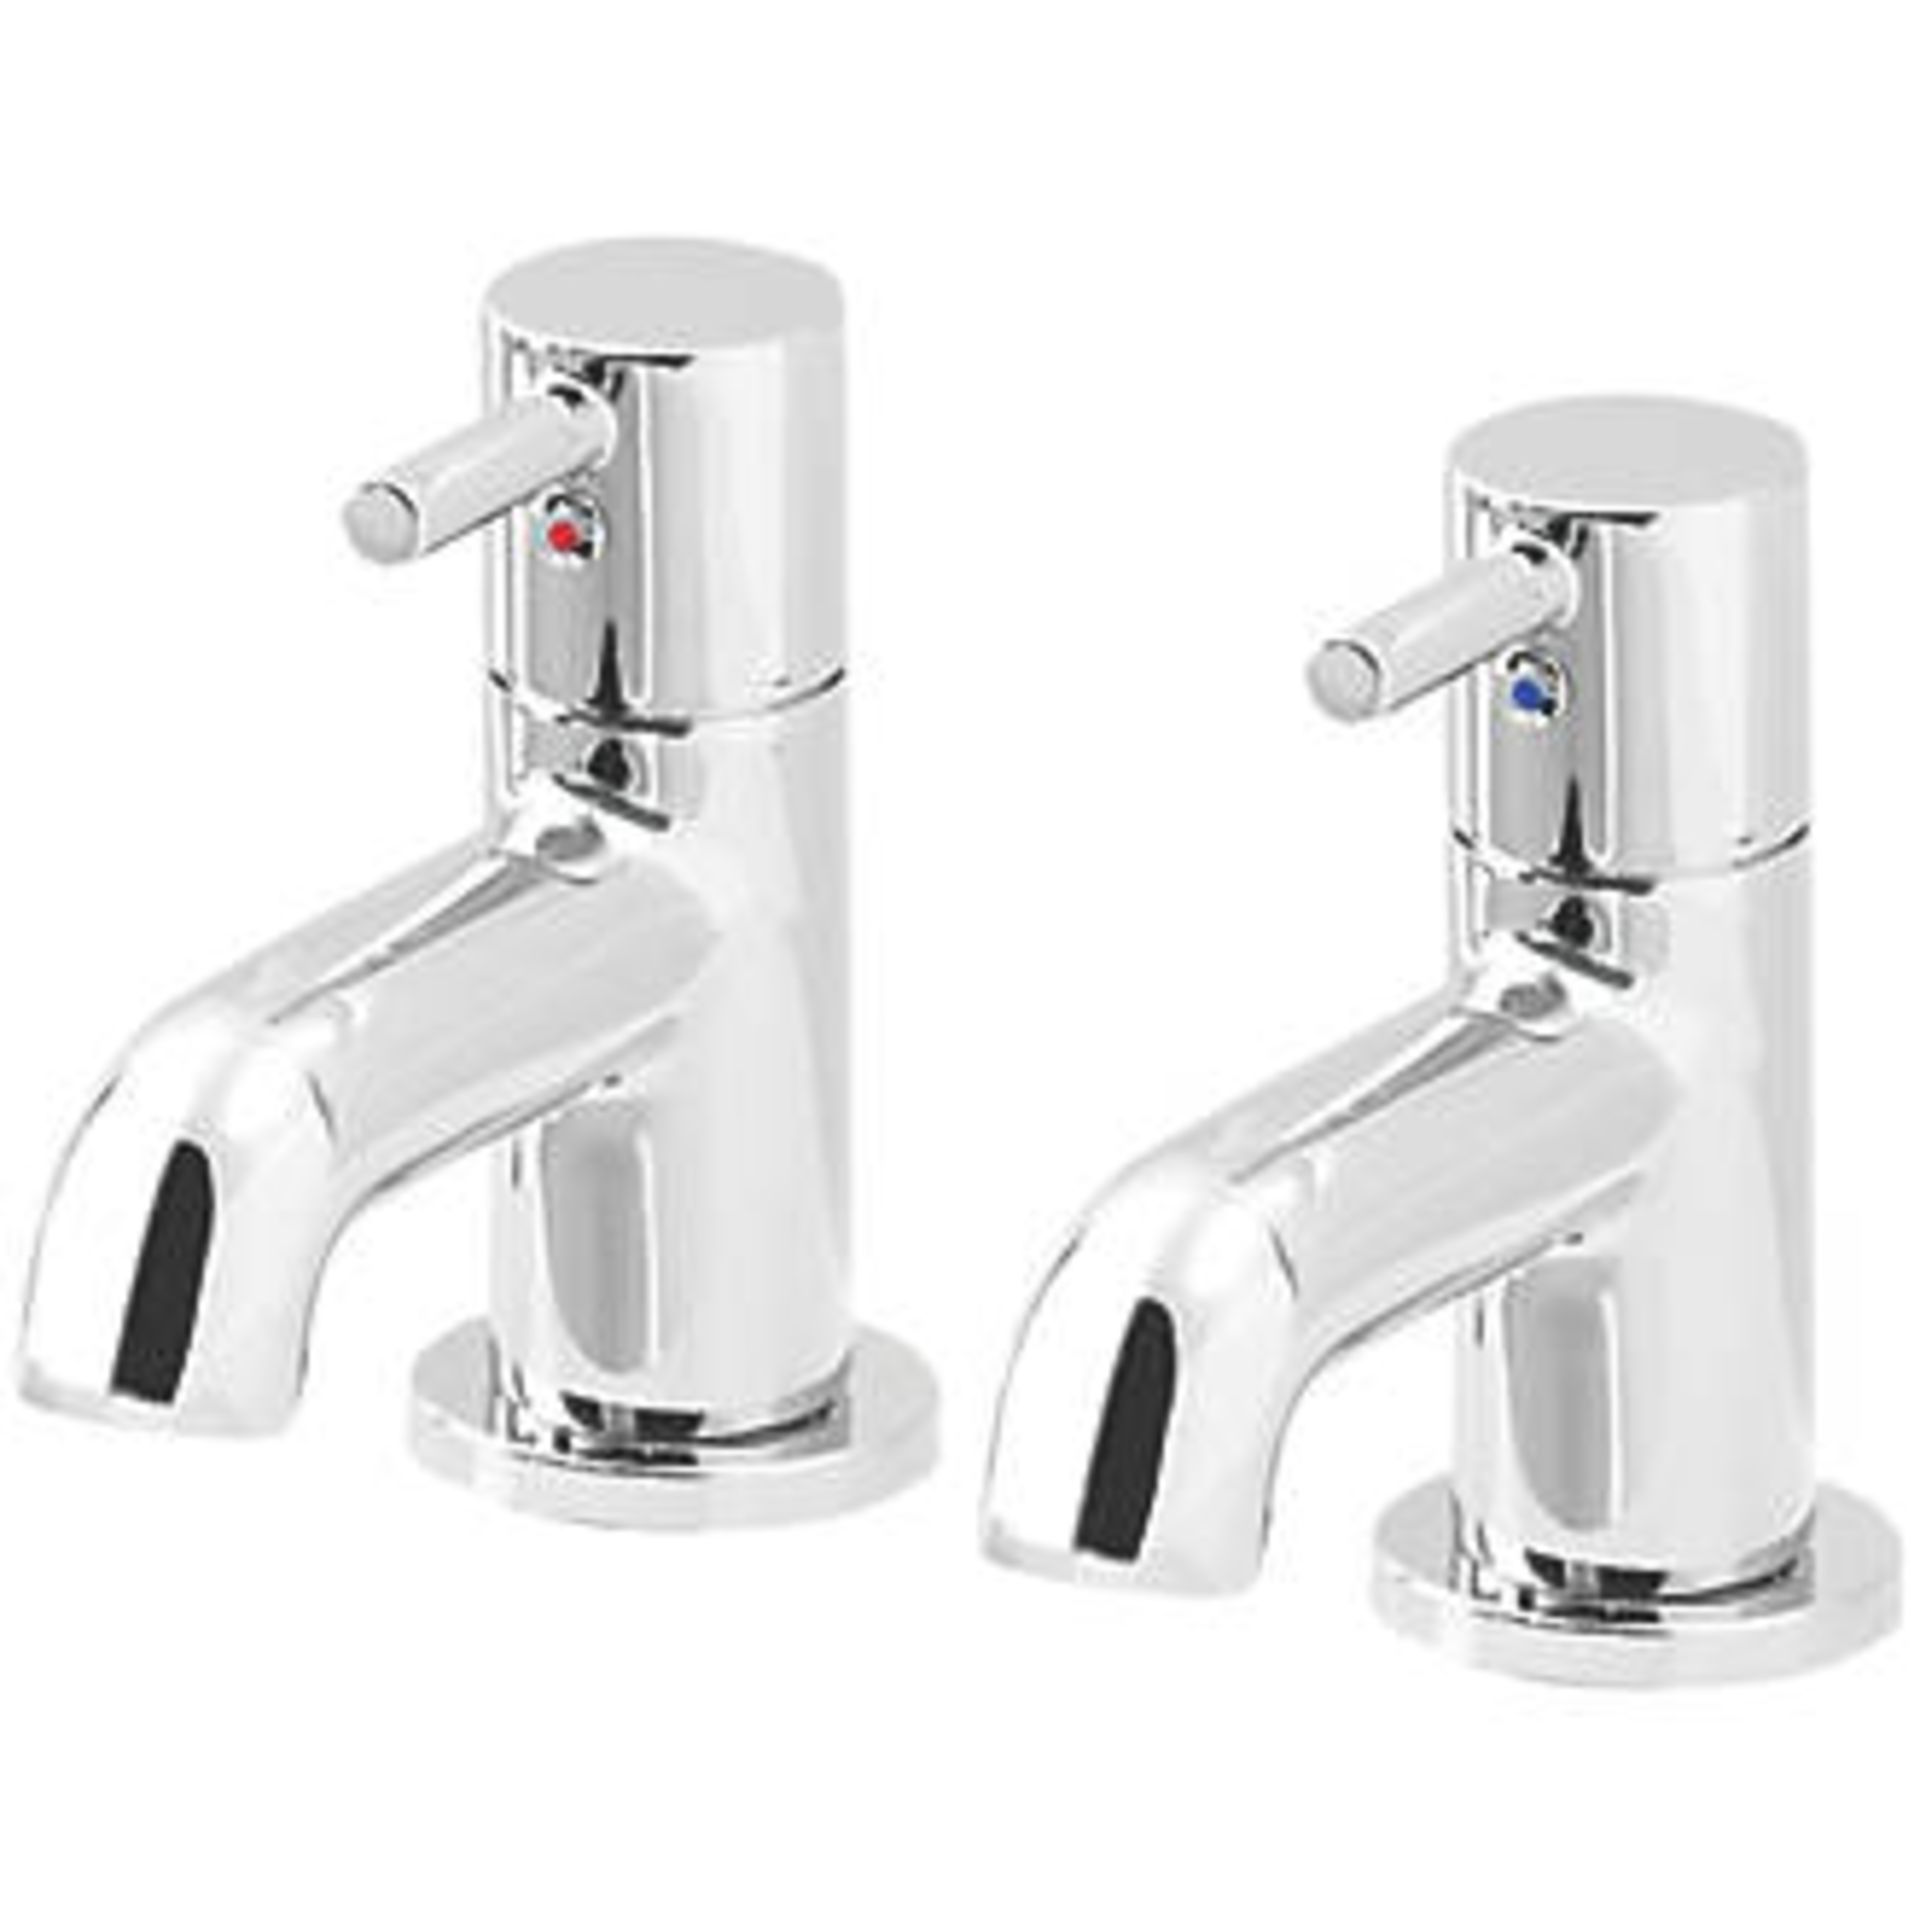 (JG125) NEW & BOXED HOFFELL BATH PILLAR TAPS. Chrome-plated brass bath pillar taps. Easy to cle... - Image 2 of 2